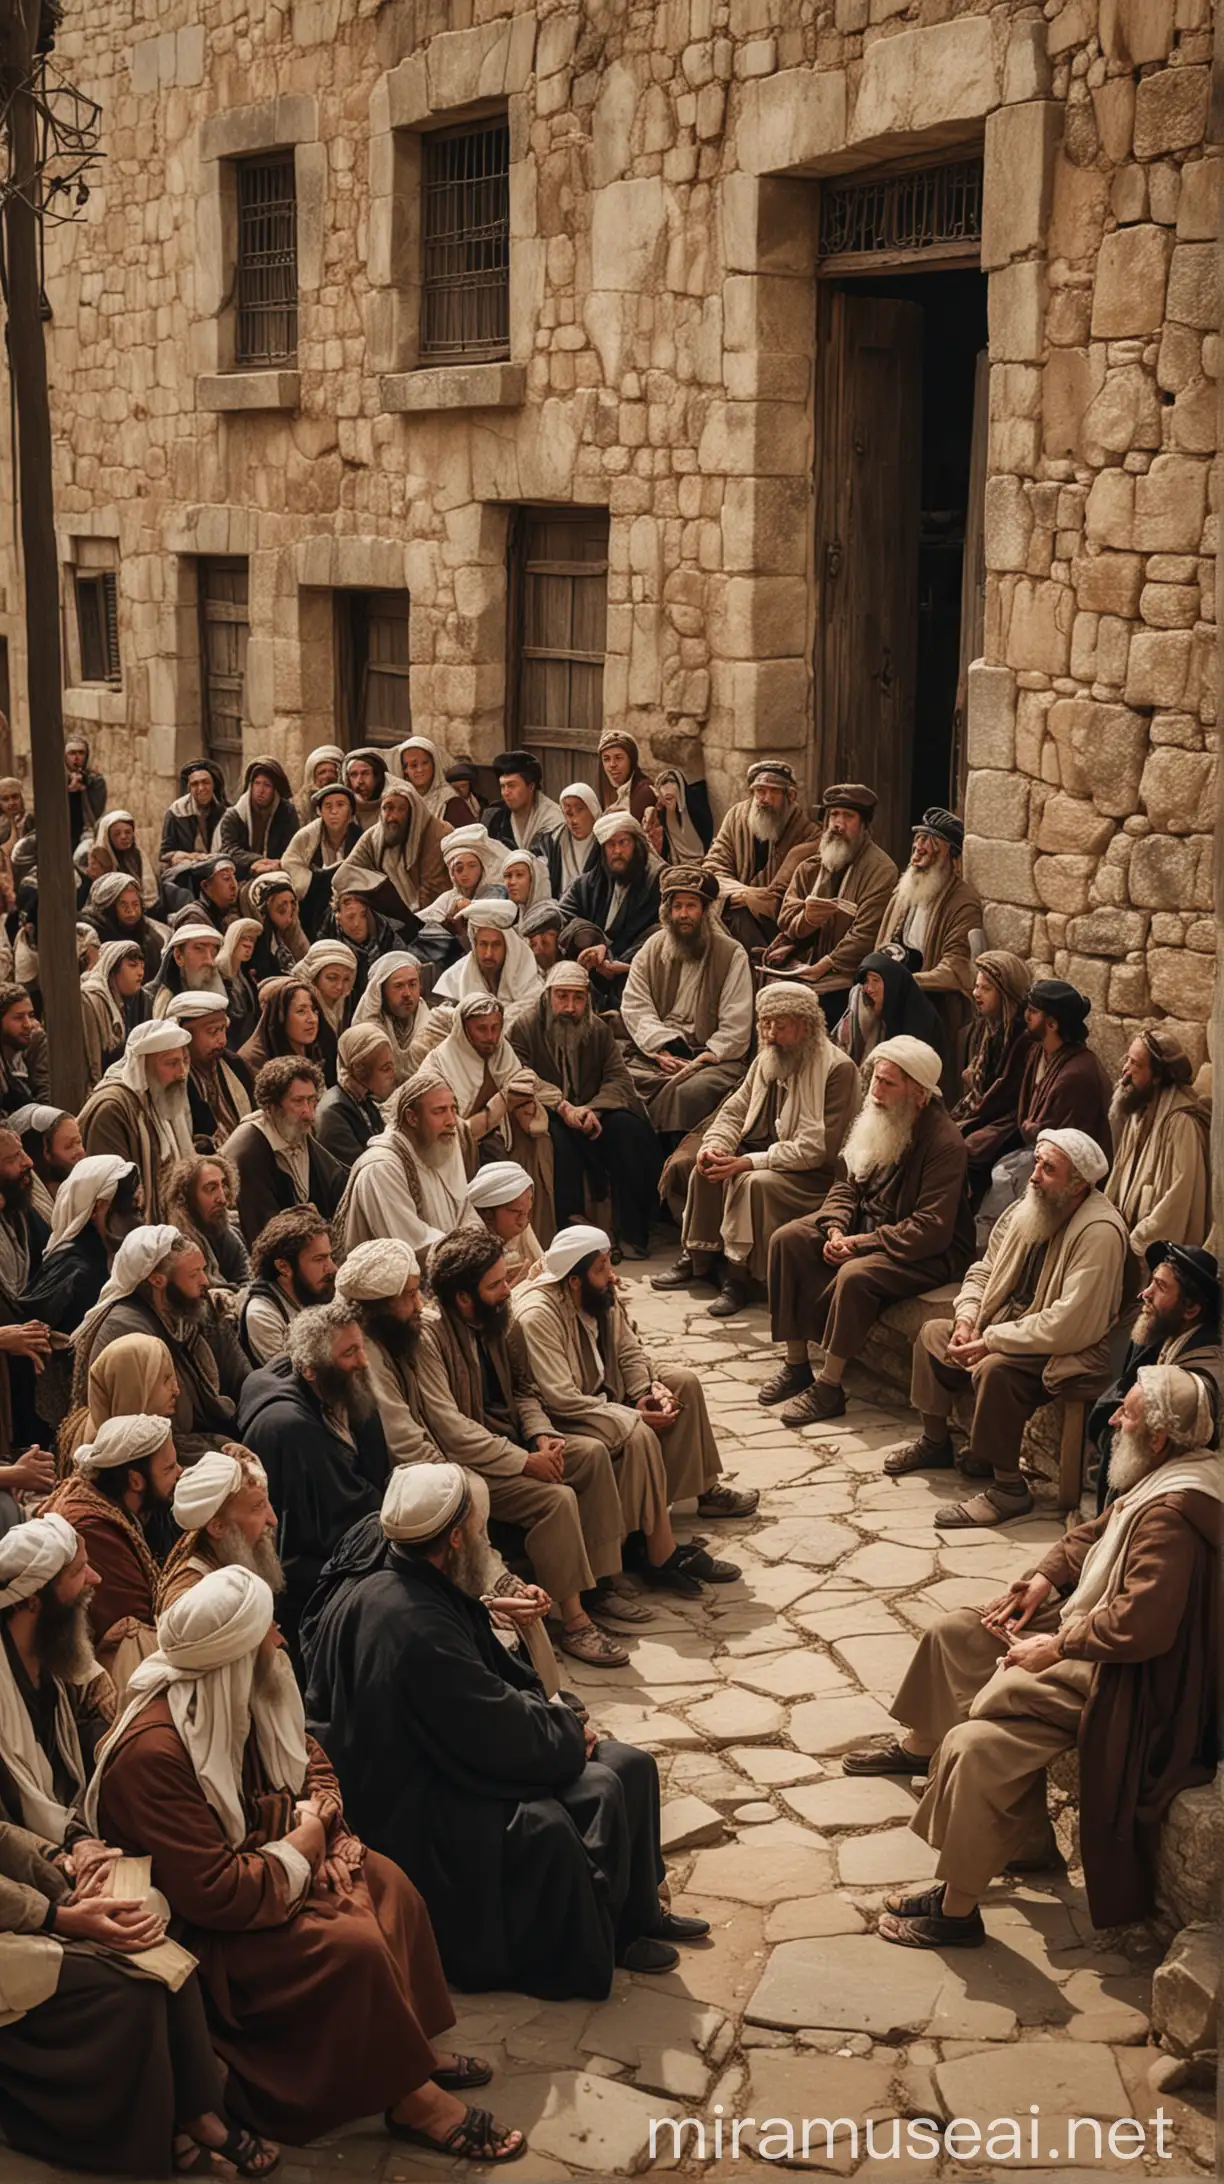 A group of Jewish people siting and listening a someone preaching in a small town in ancient world 